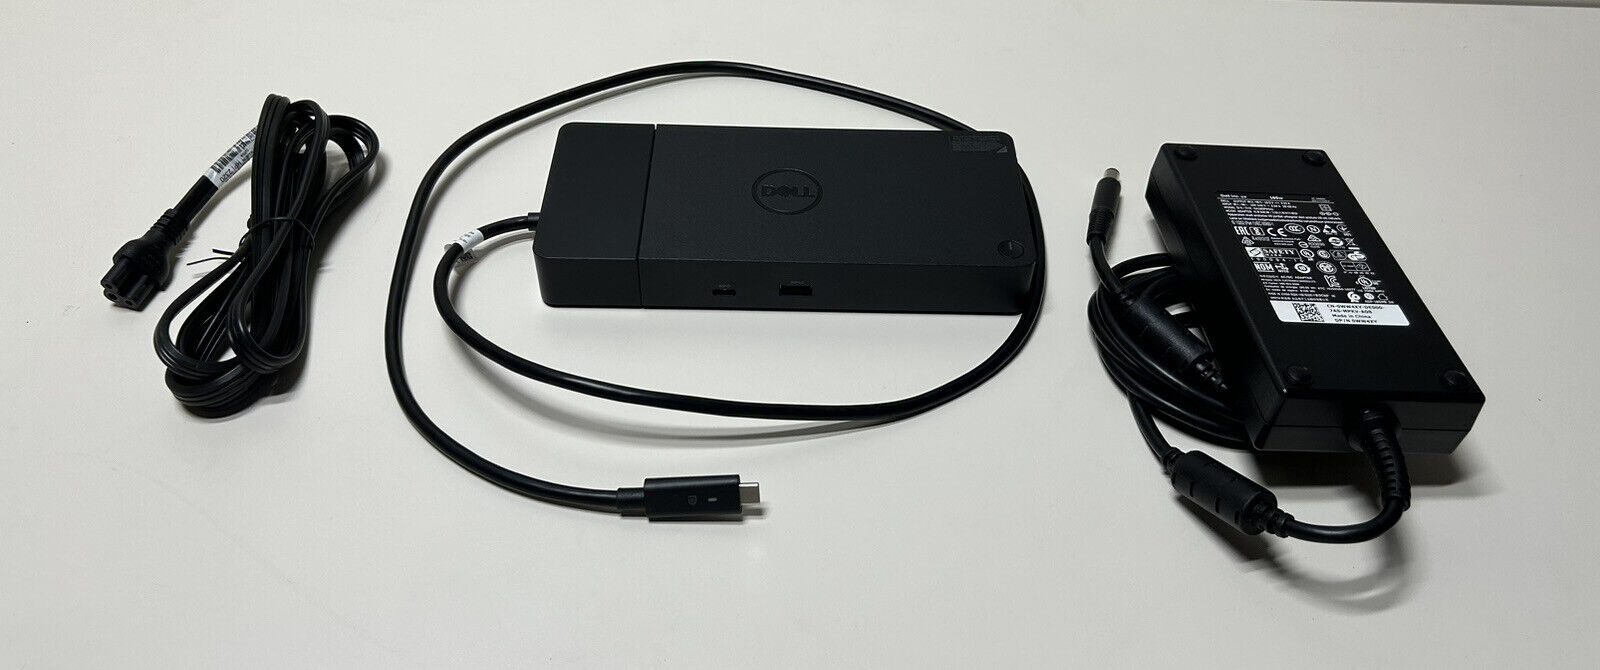 Dell WD19S (K20A001) USB Type-C Docking Station w/ 180W Power Adapter Tested